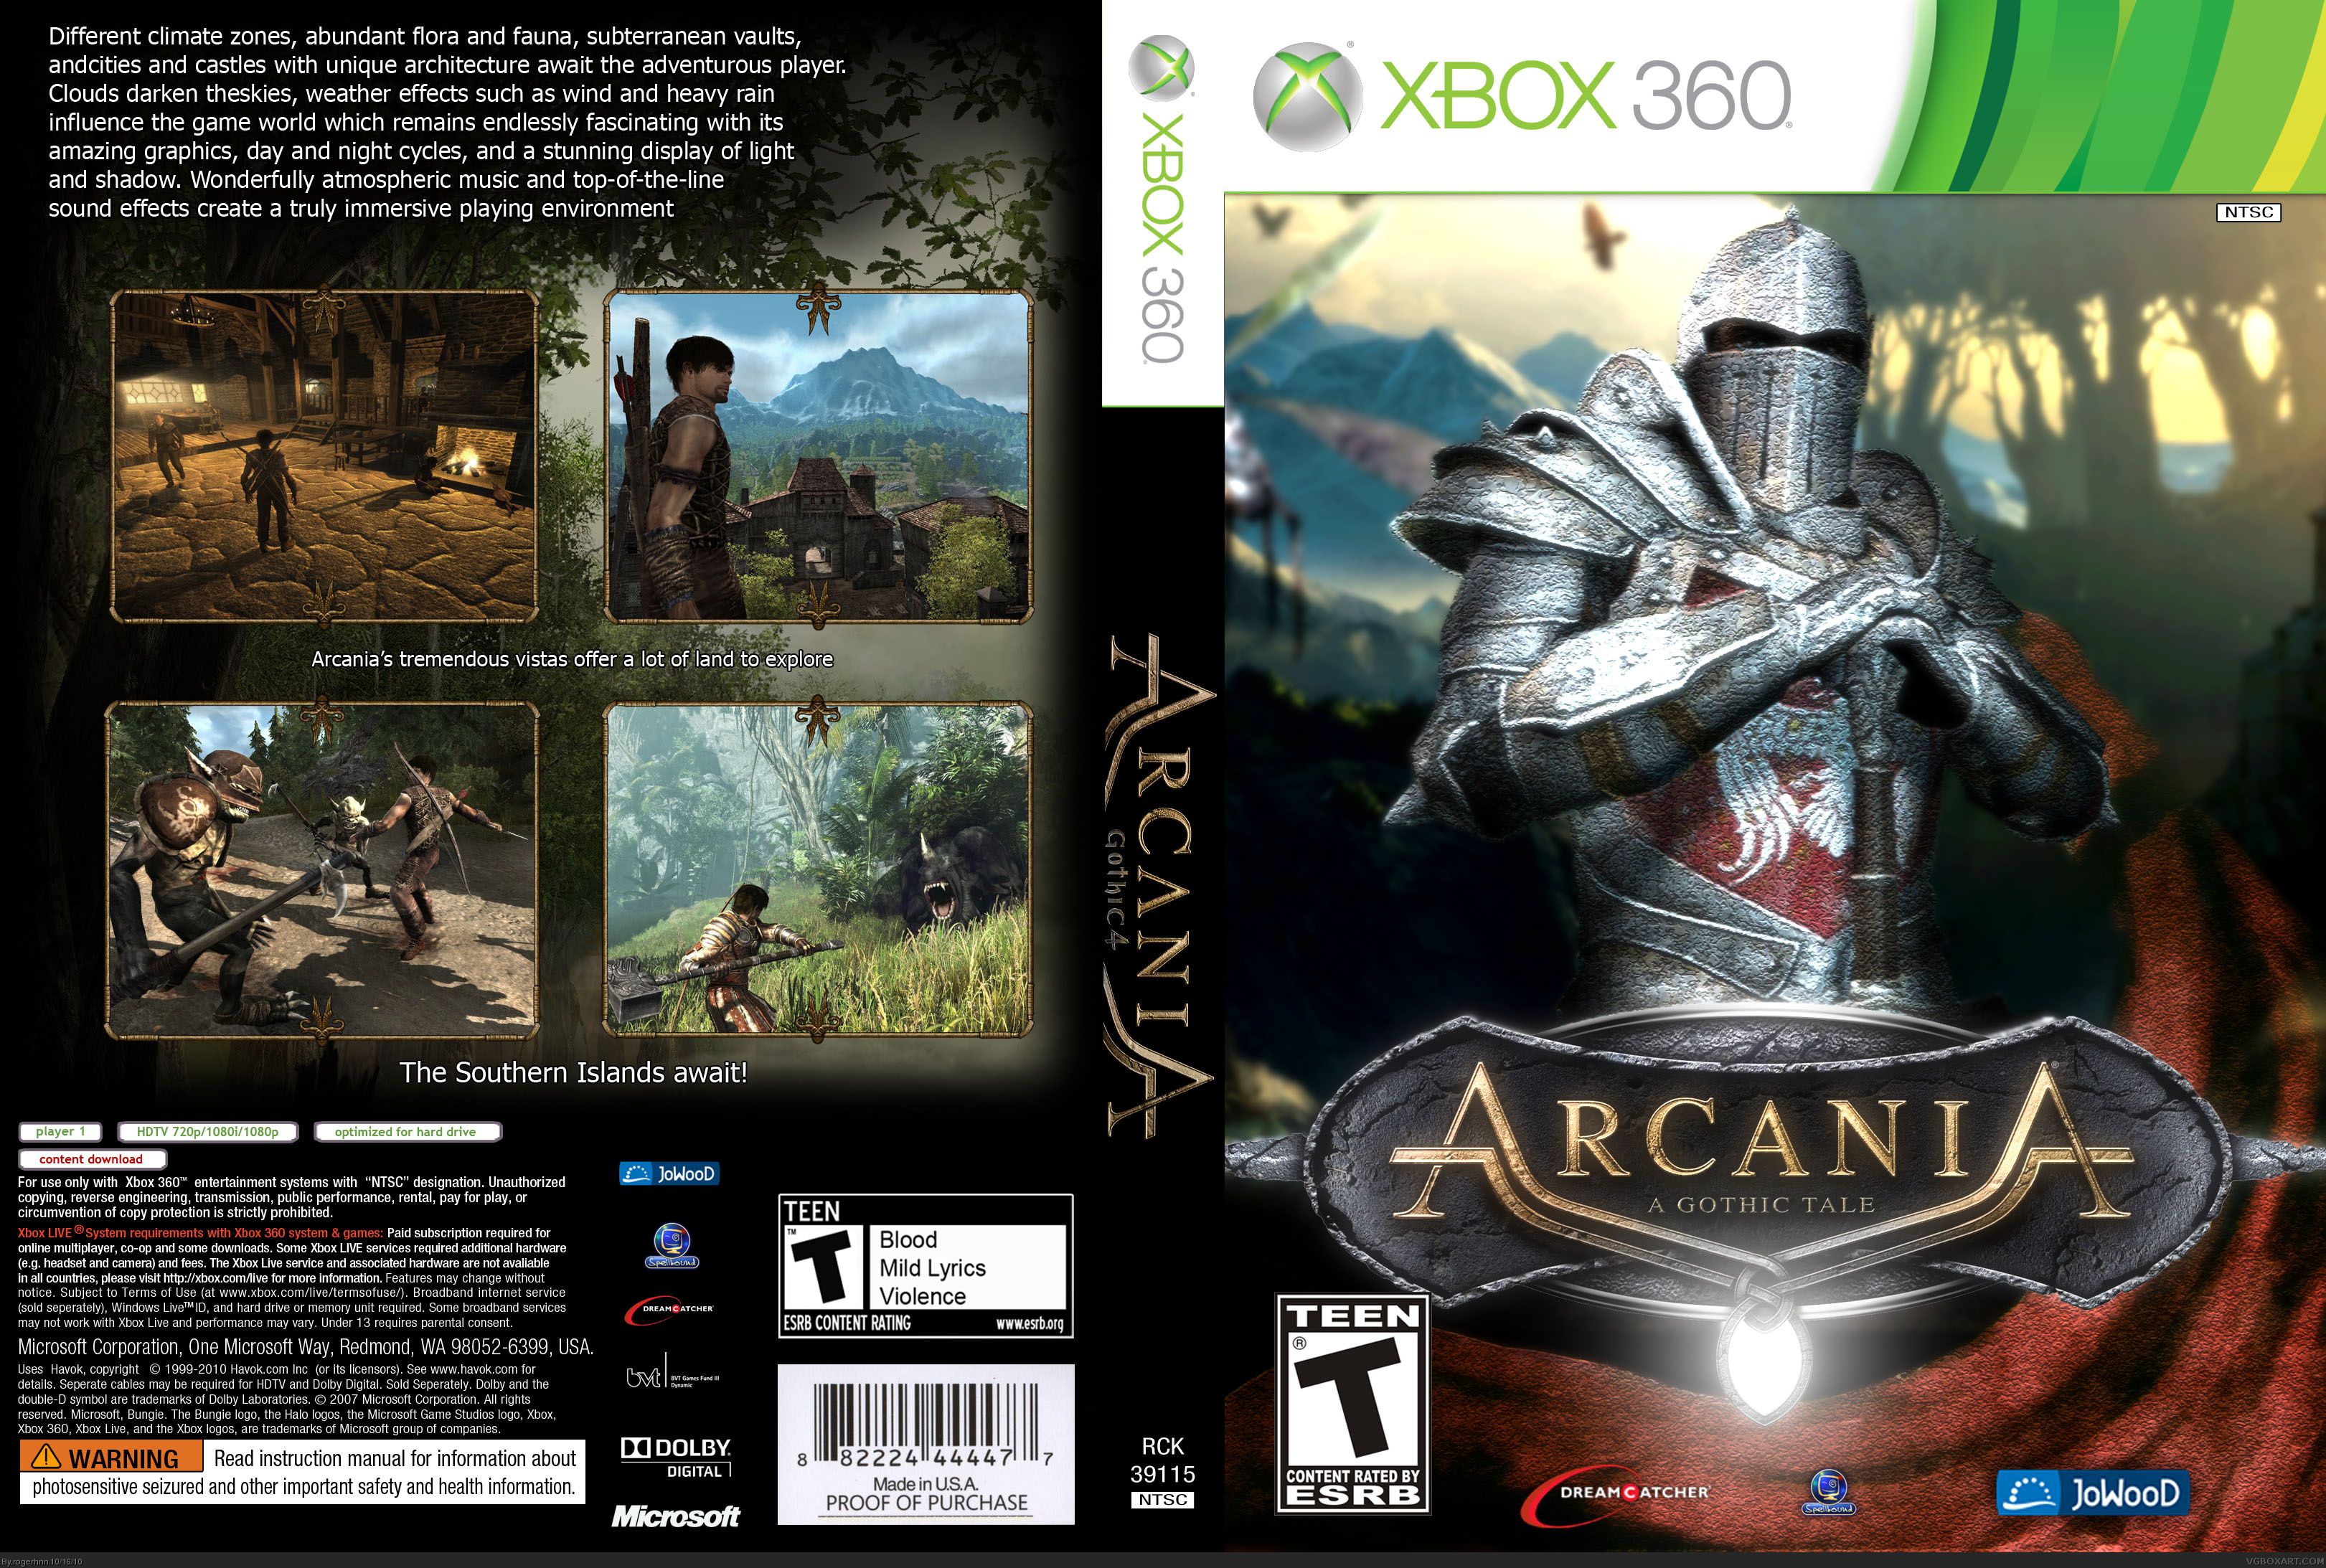 Arcania: A Gothic Tale box cover